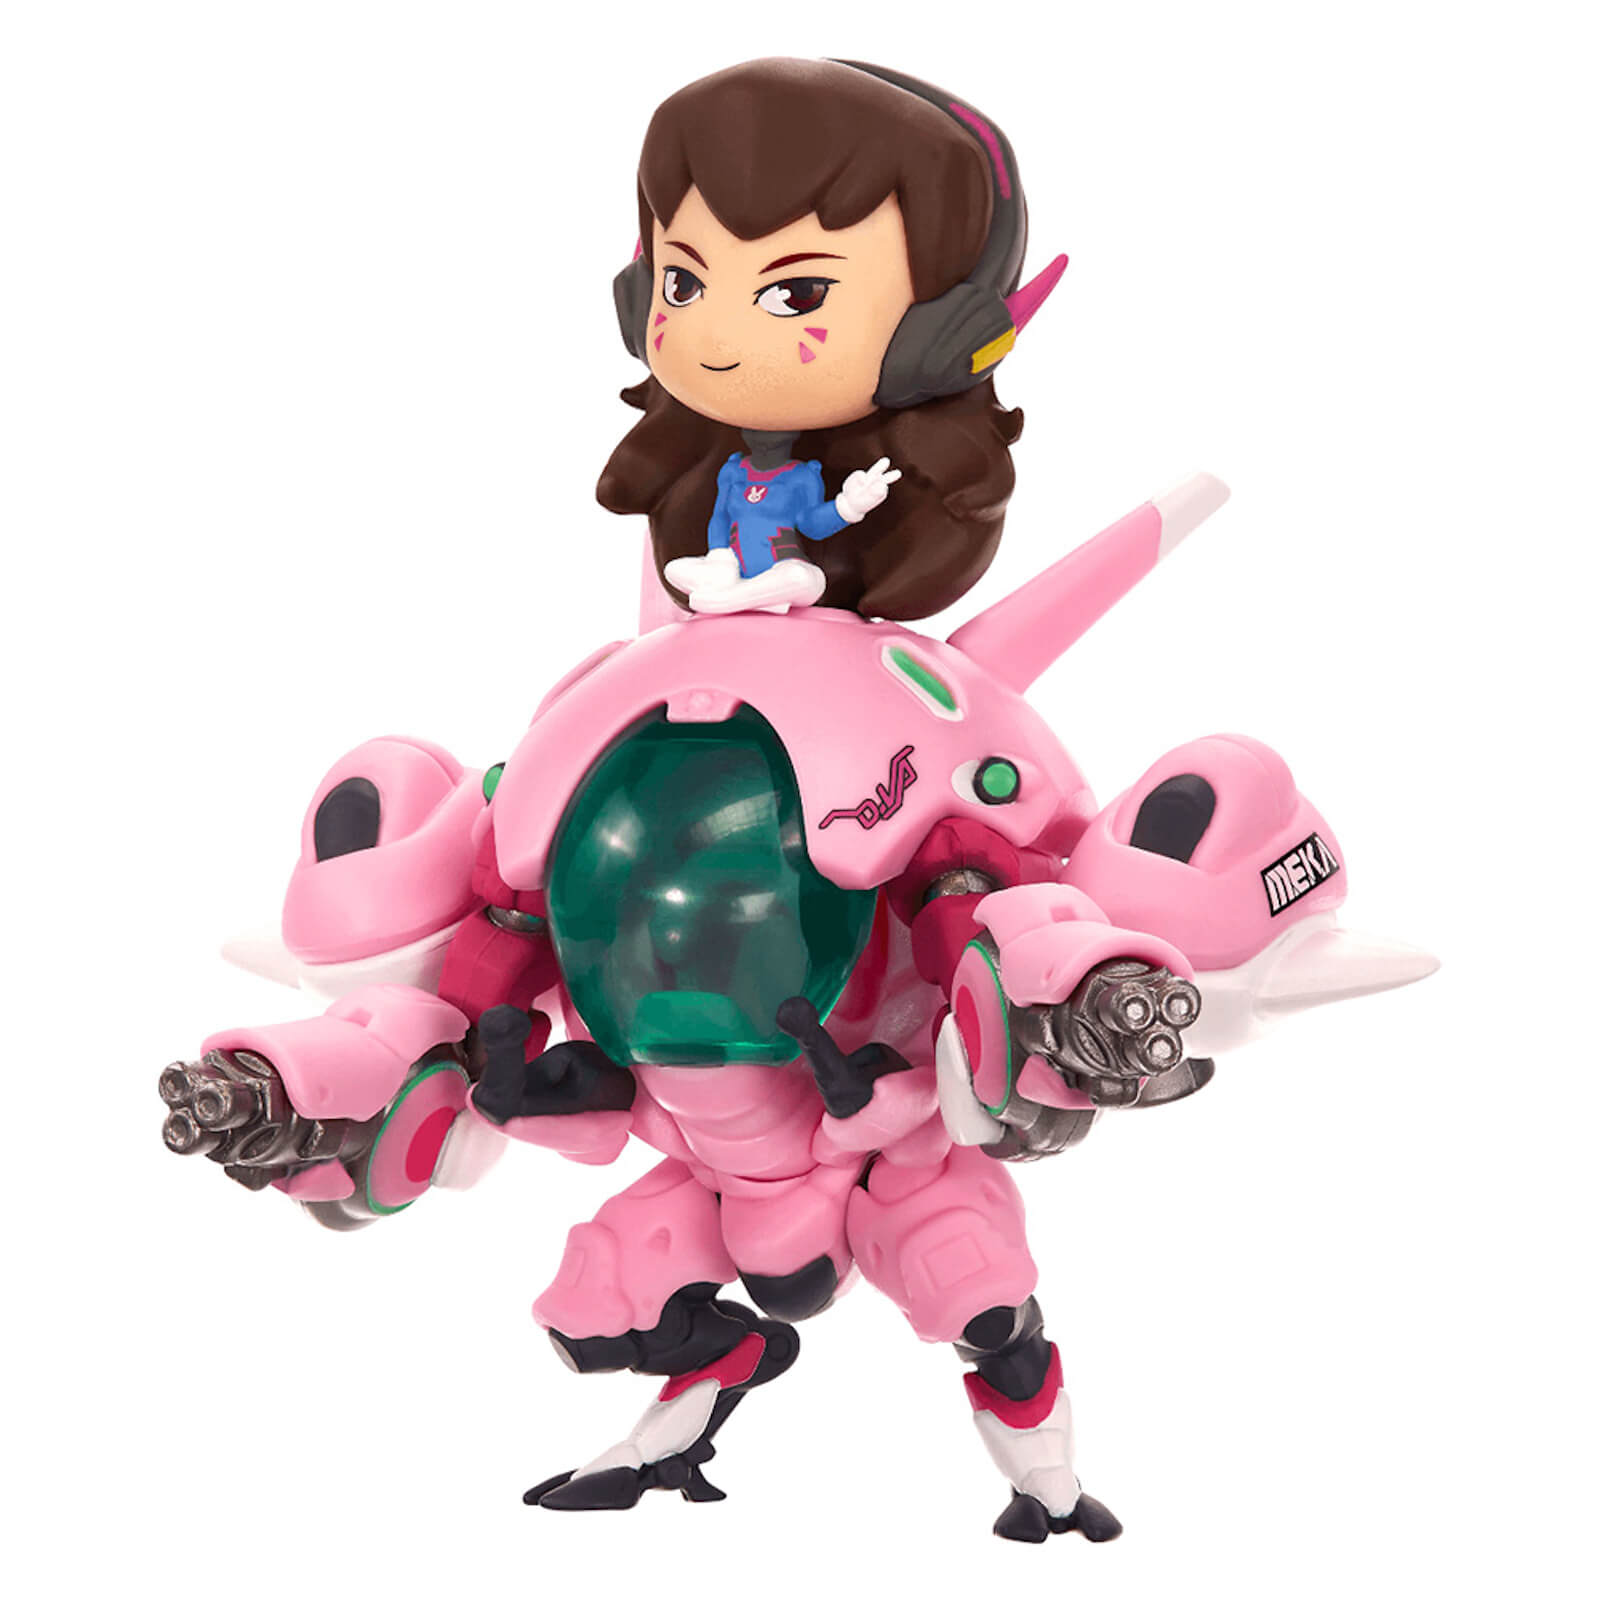 Blizzard Overwatch Cute But Deadly D.Va with MEKA Figure